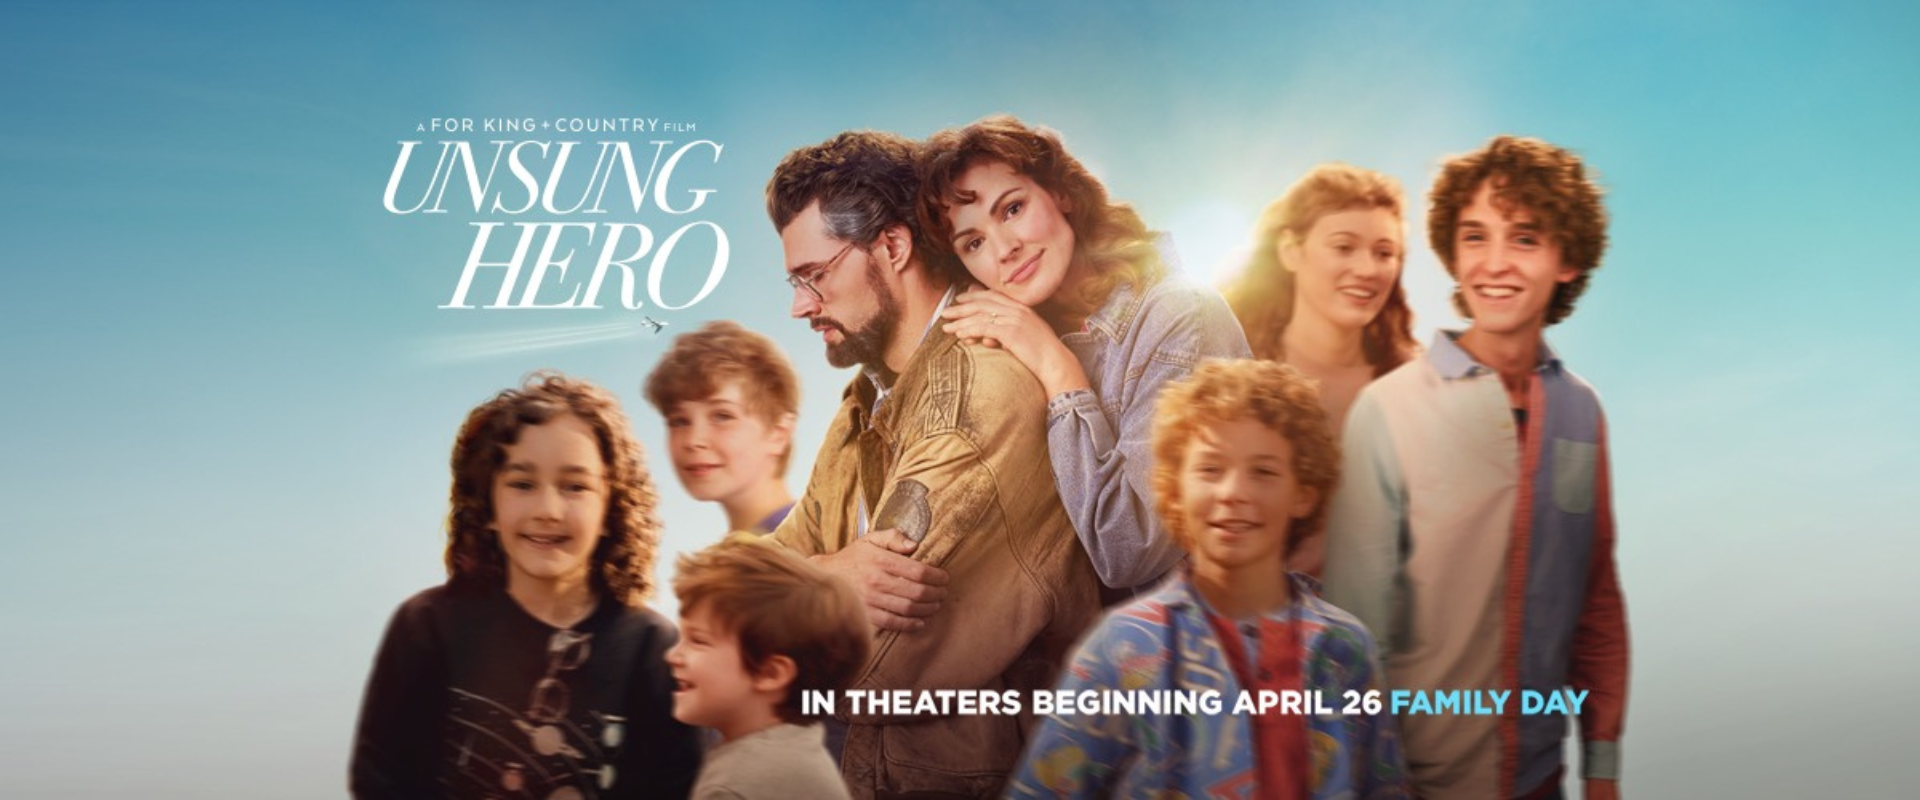 Win Tickets to See for King & Country’s New Movie “Unsung Hero”